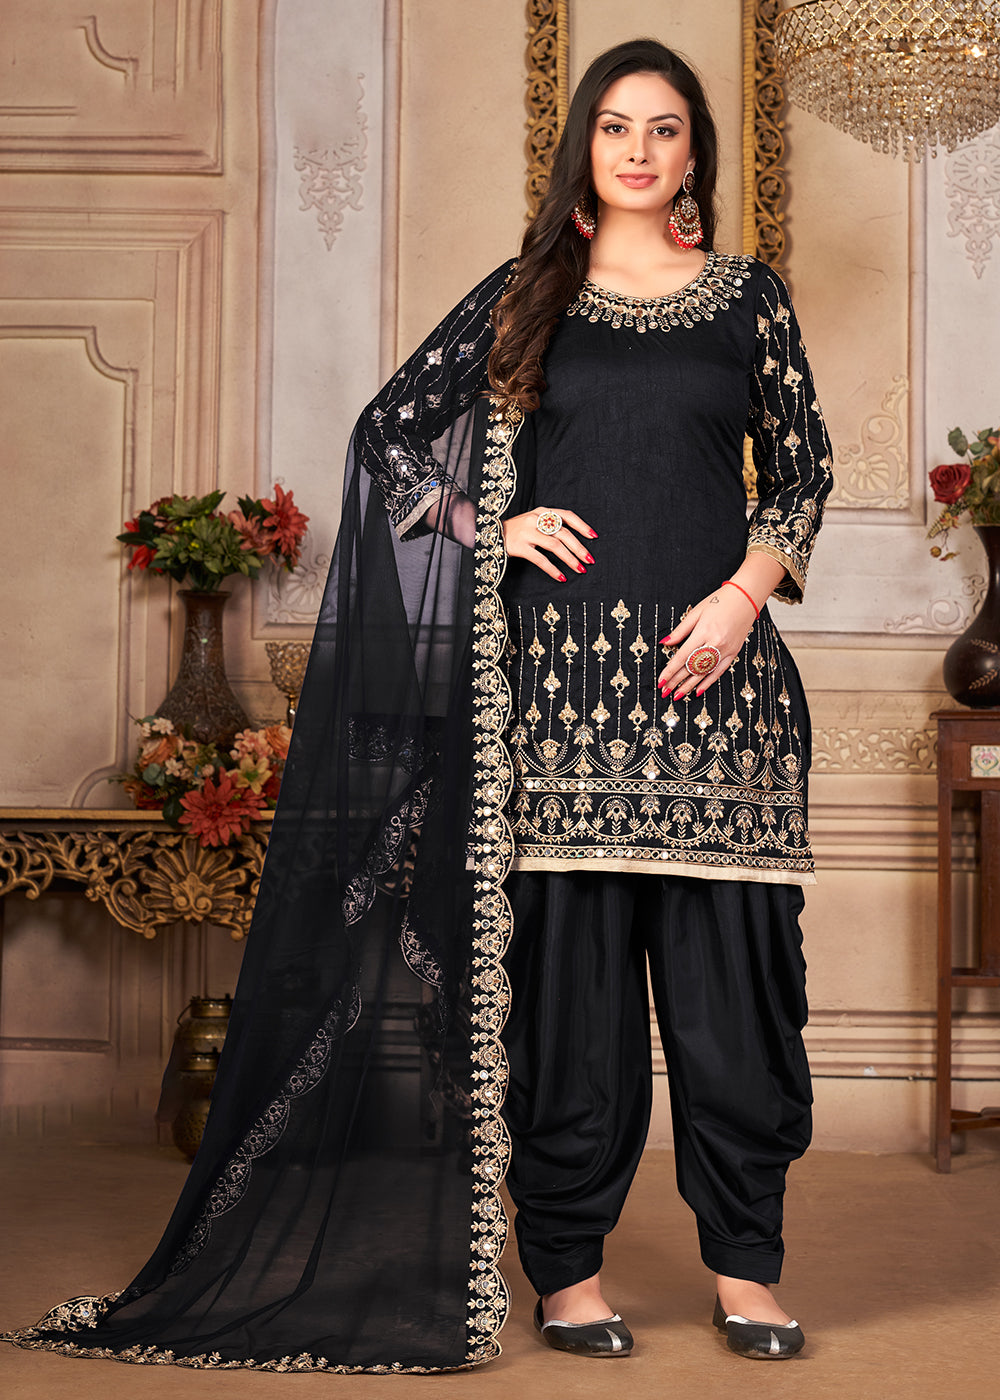 Buy Now Black Patiala Style Silk Crafted Punjabi Salwar Suit Online in USA, UK, Canada & Worldwide at Empress Clothing.